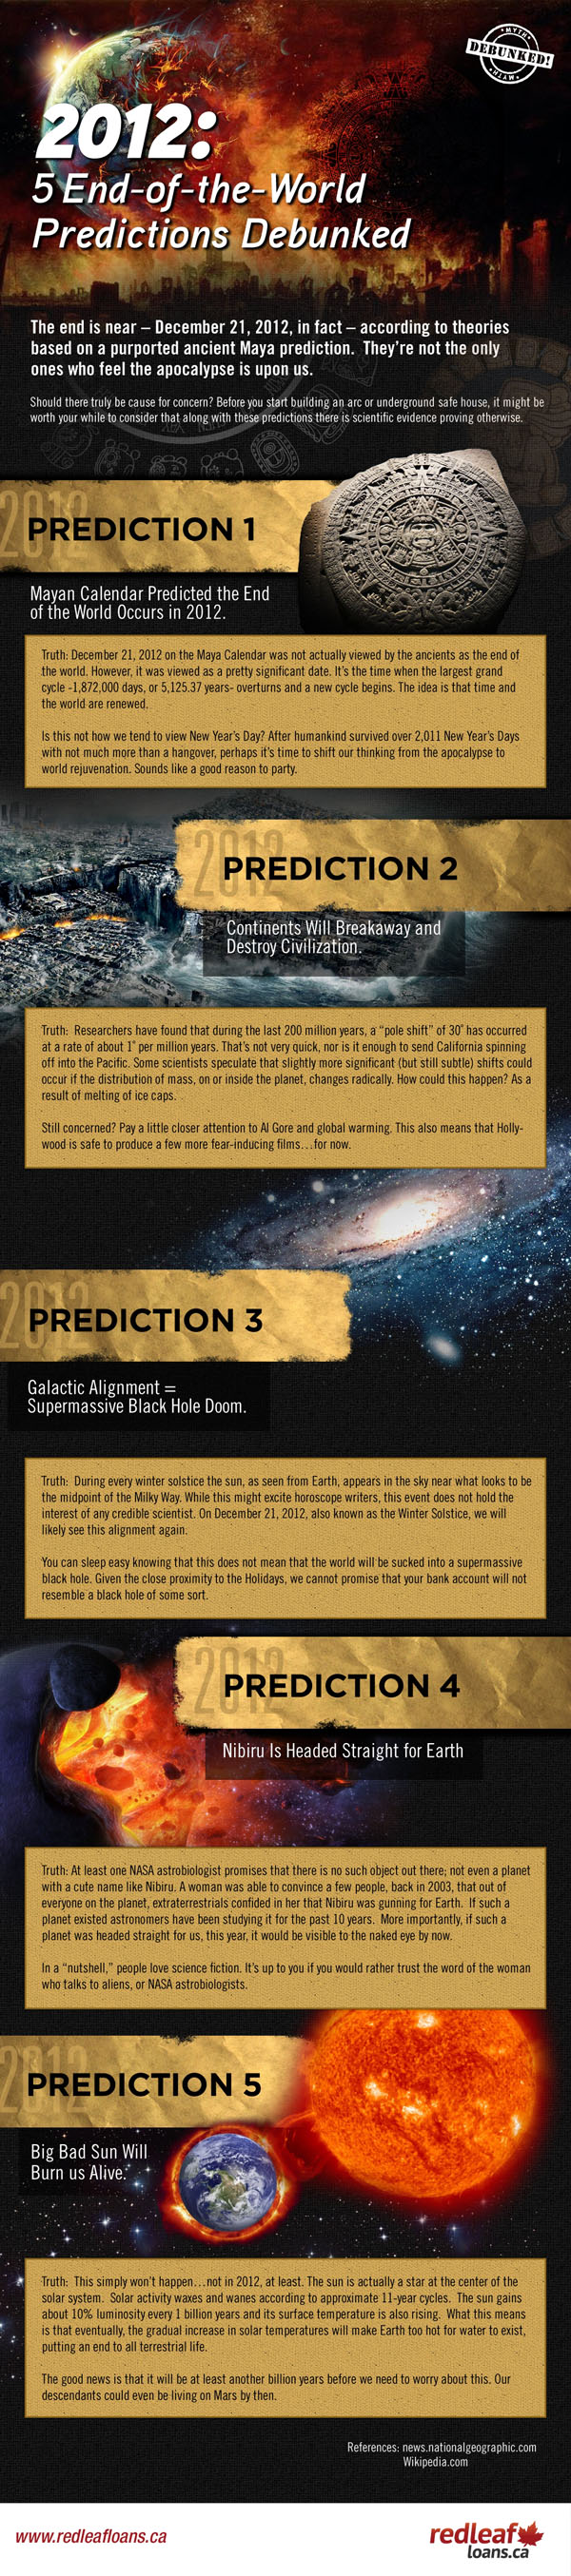 2012: 5 End-of-the-World Predictions Debunked